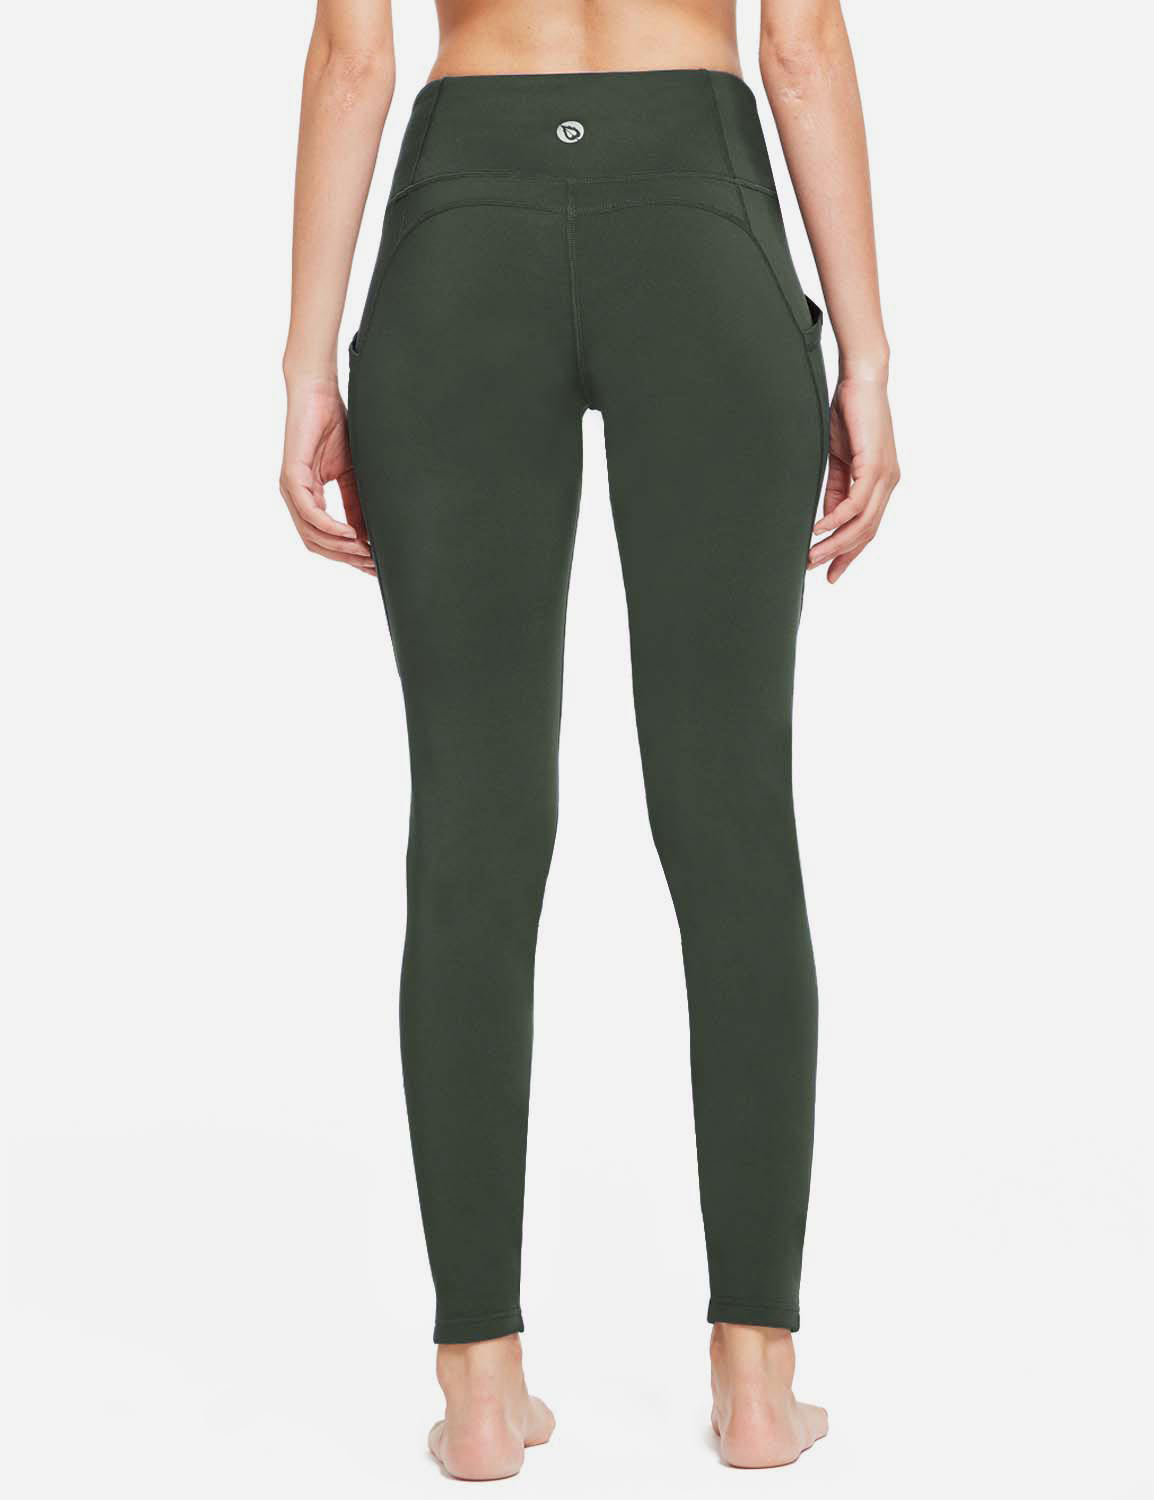 Baleaf Women's Thermal High Rise Fleece Lined Contour Leggings abh145 Army Green Back